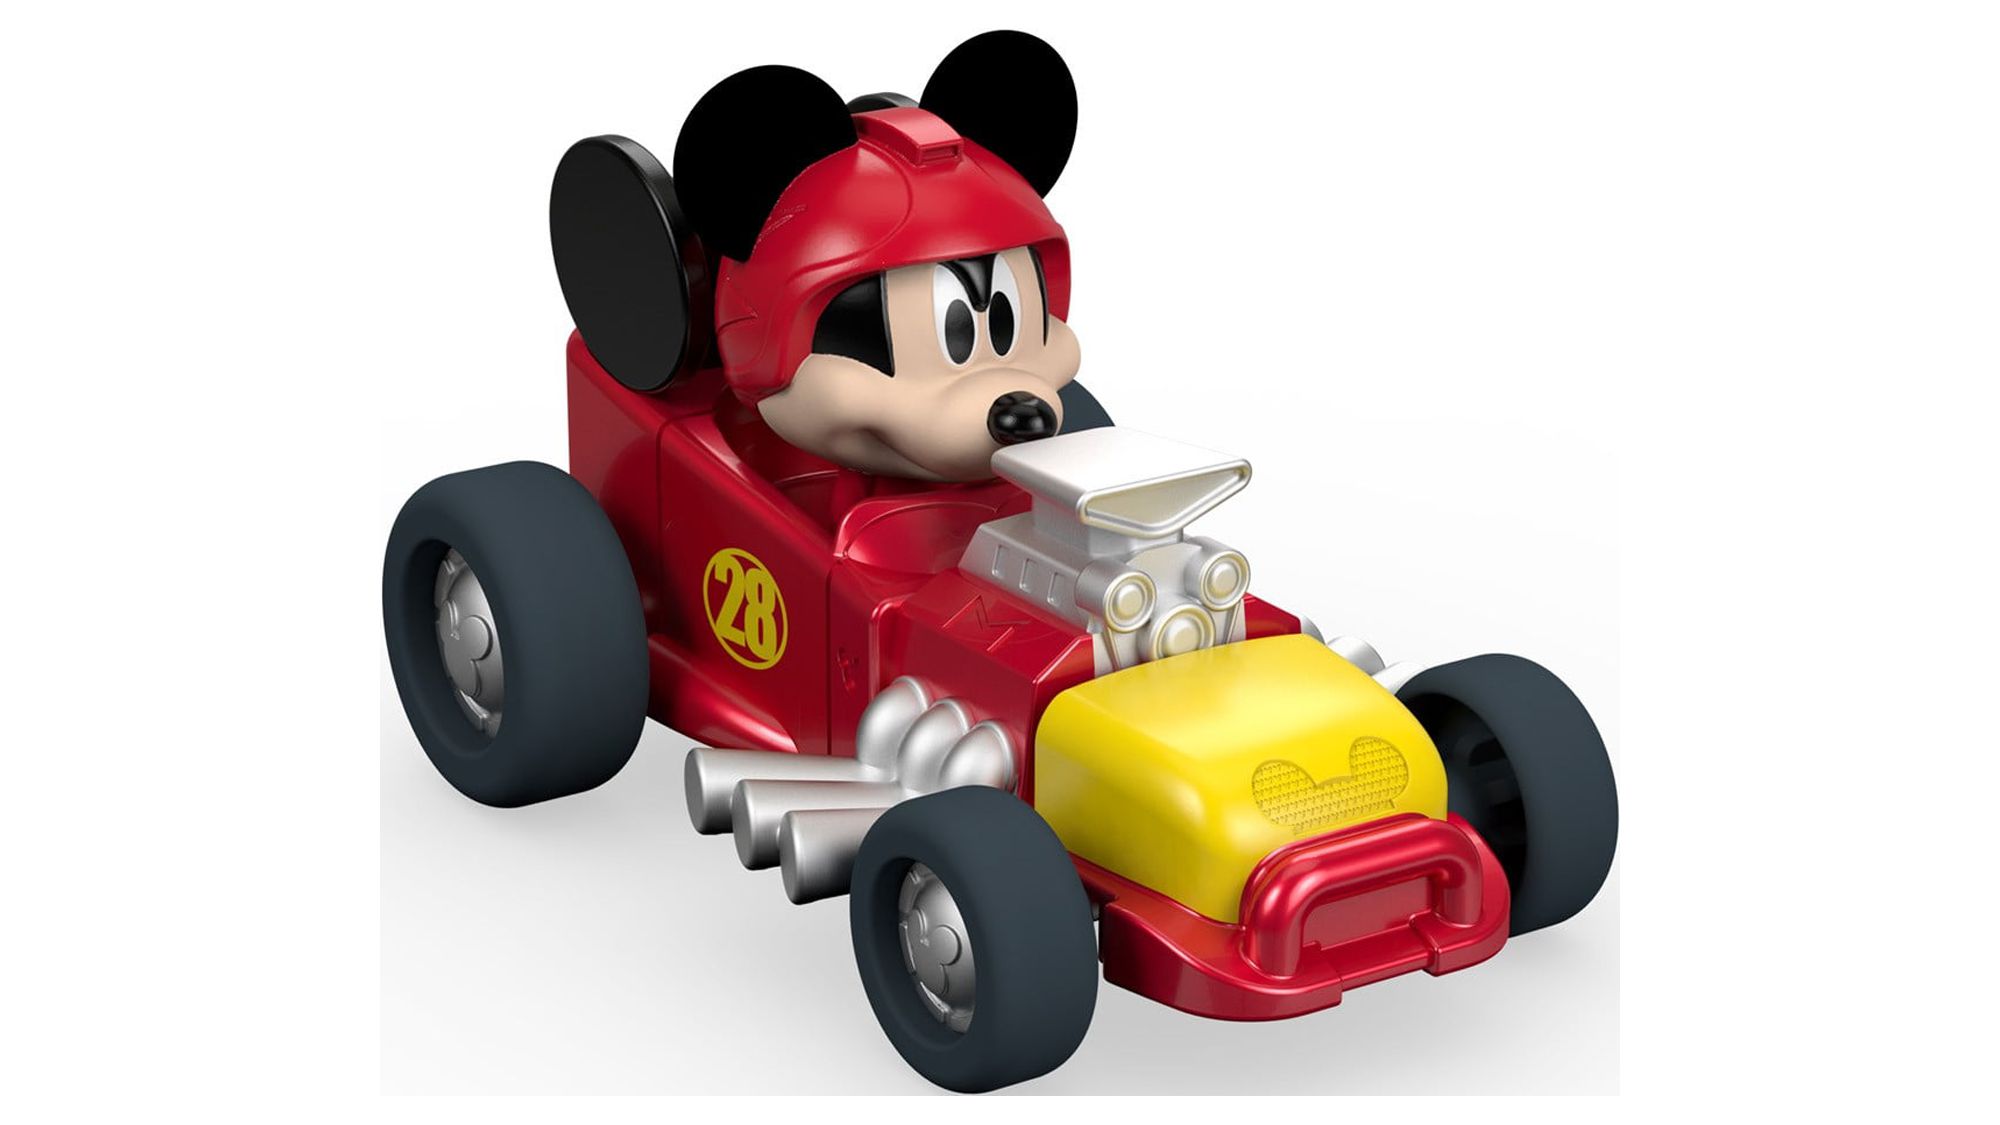 Disney Mickey and the Roadster Racers Mickey's Hot Rod - image 1 of 6